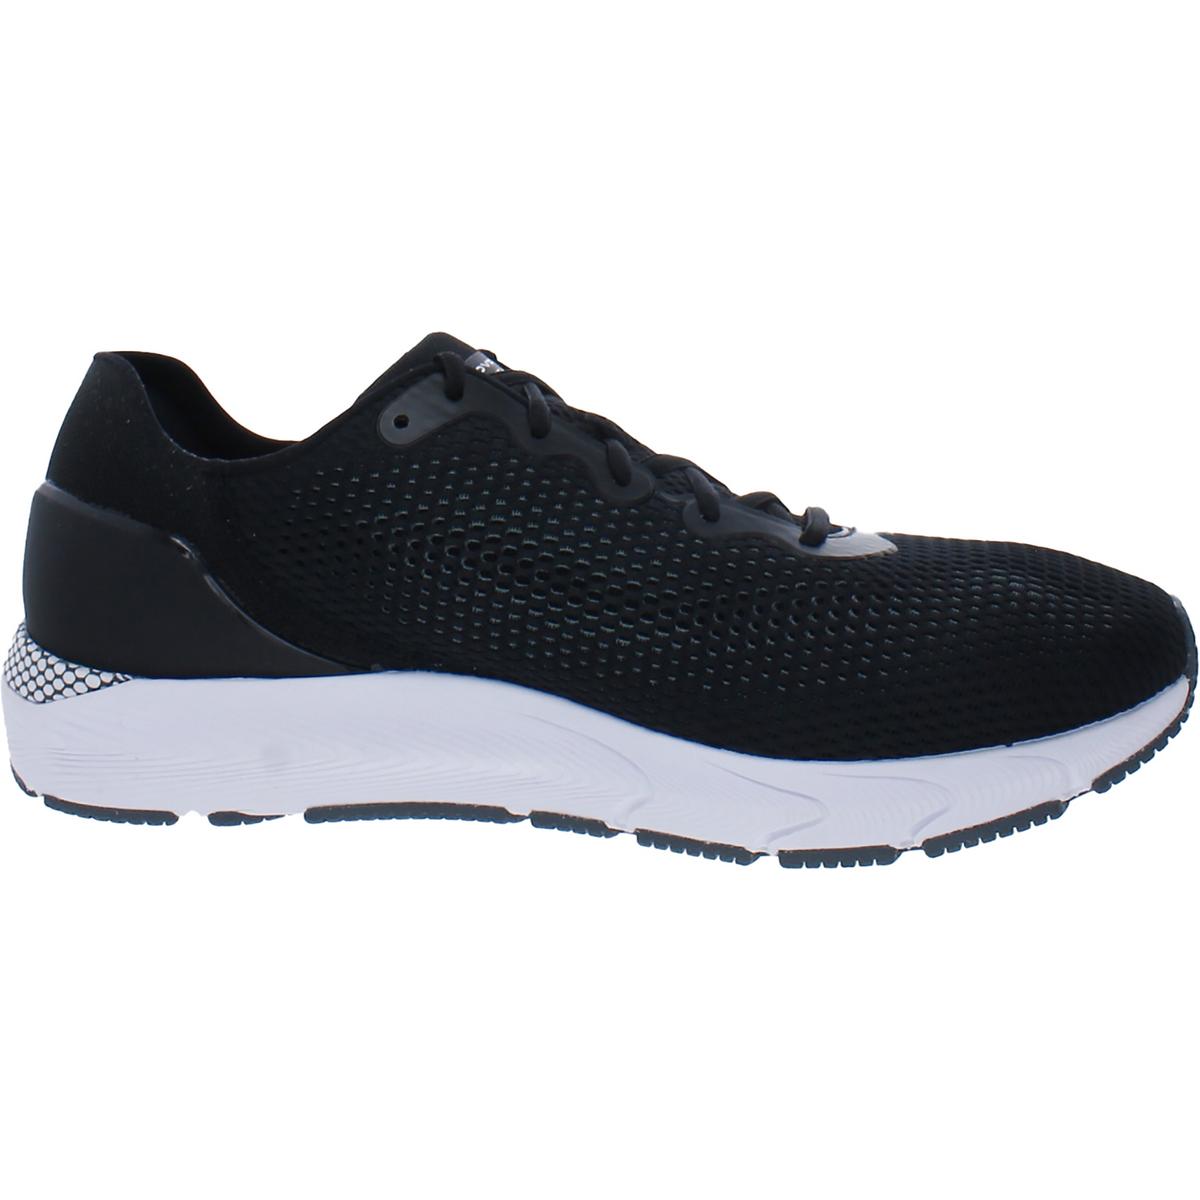 Under Armour HOVR Sonic 4 Mens Performance Bluetooth Smart Shoes